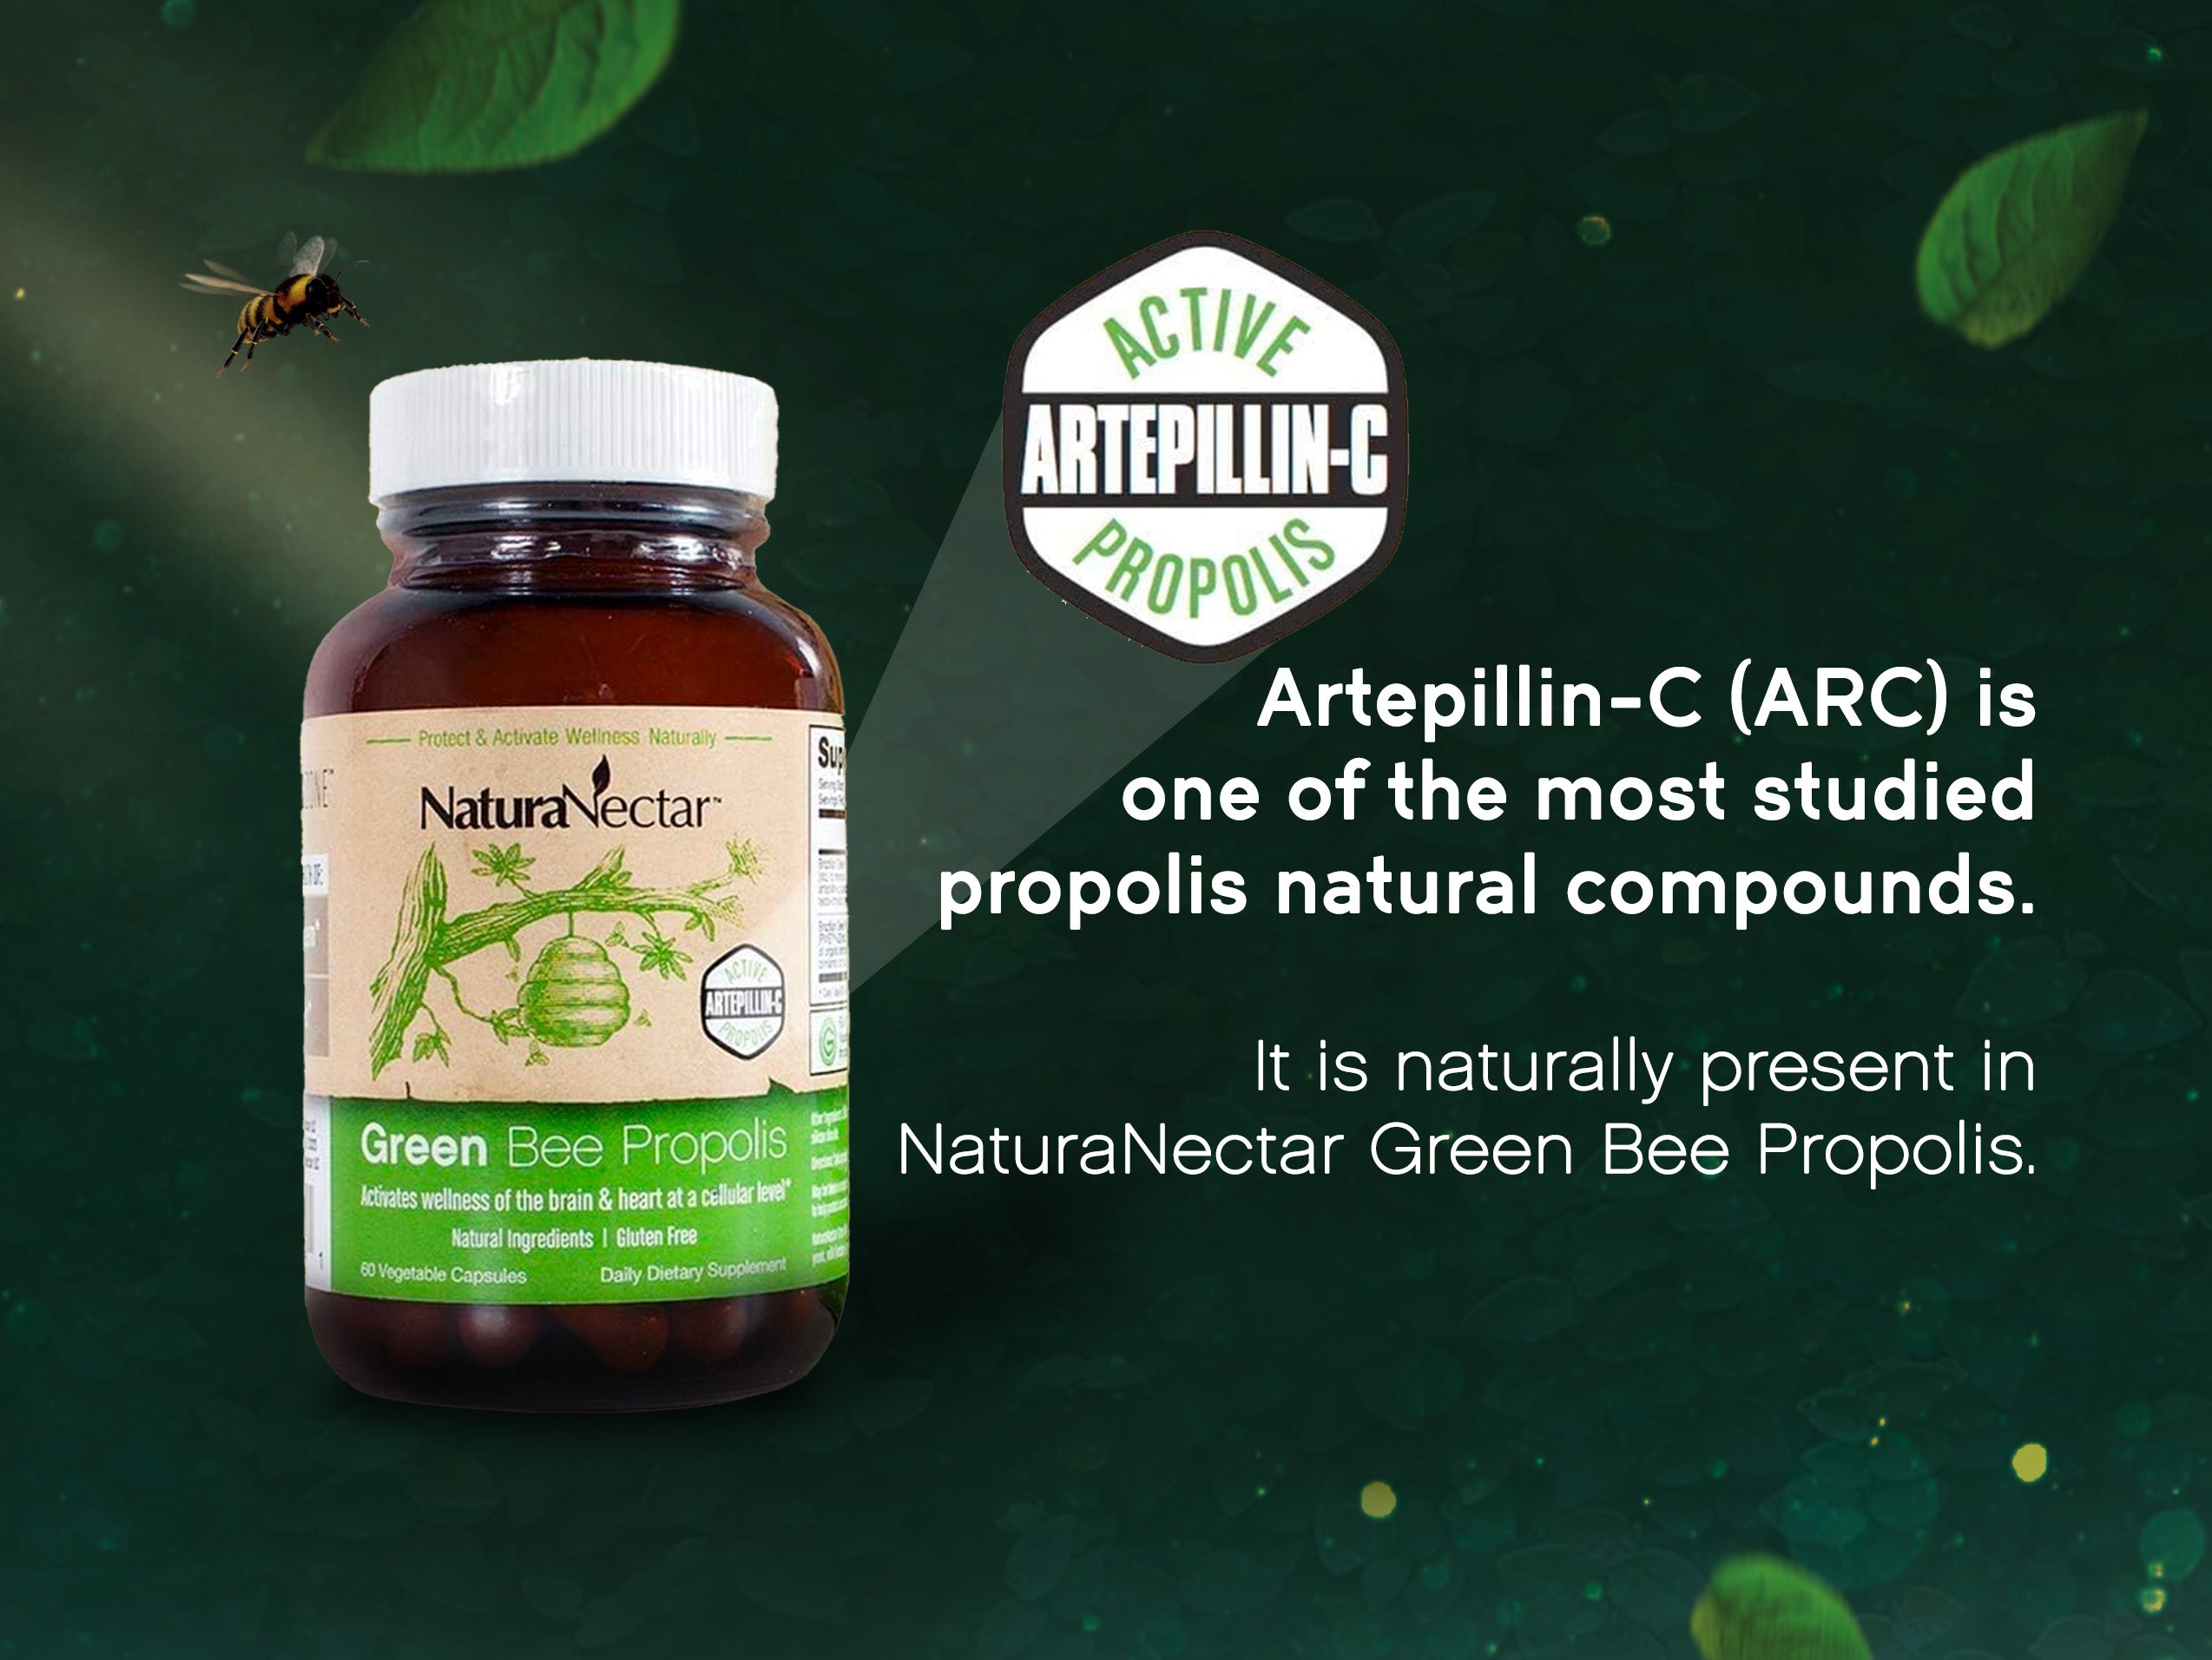 Green Bee Propolis - Nootropic product supports wellness of your brain* & immune system health* through exclusive polyphenols like Artepillin-C  - Pack of 3